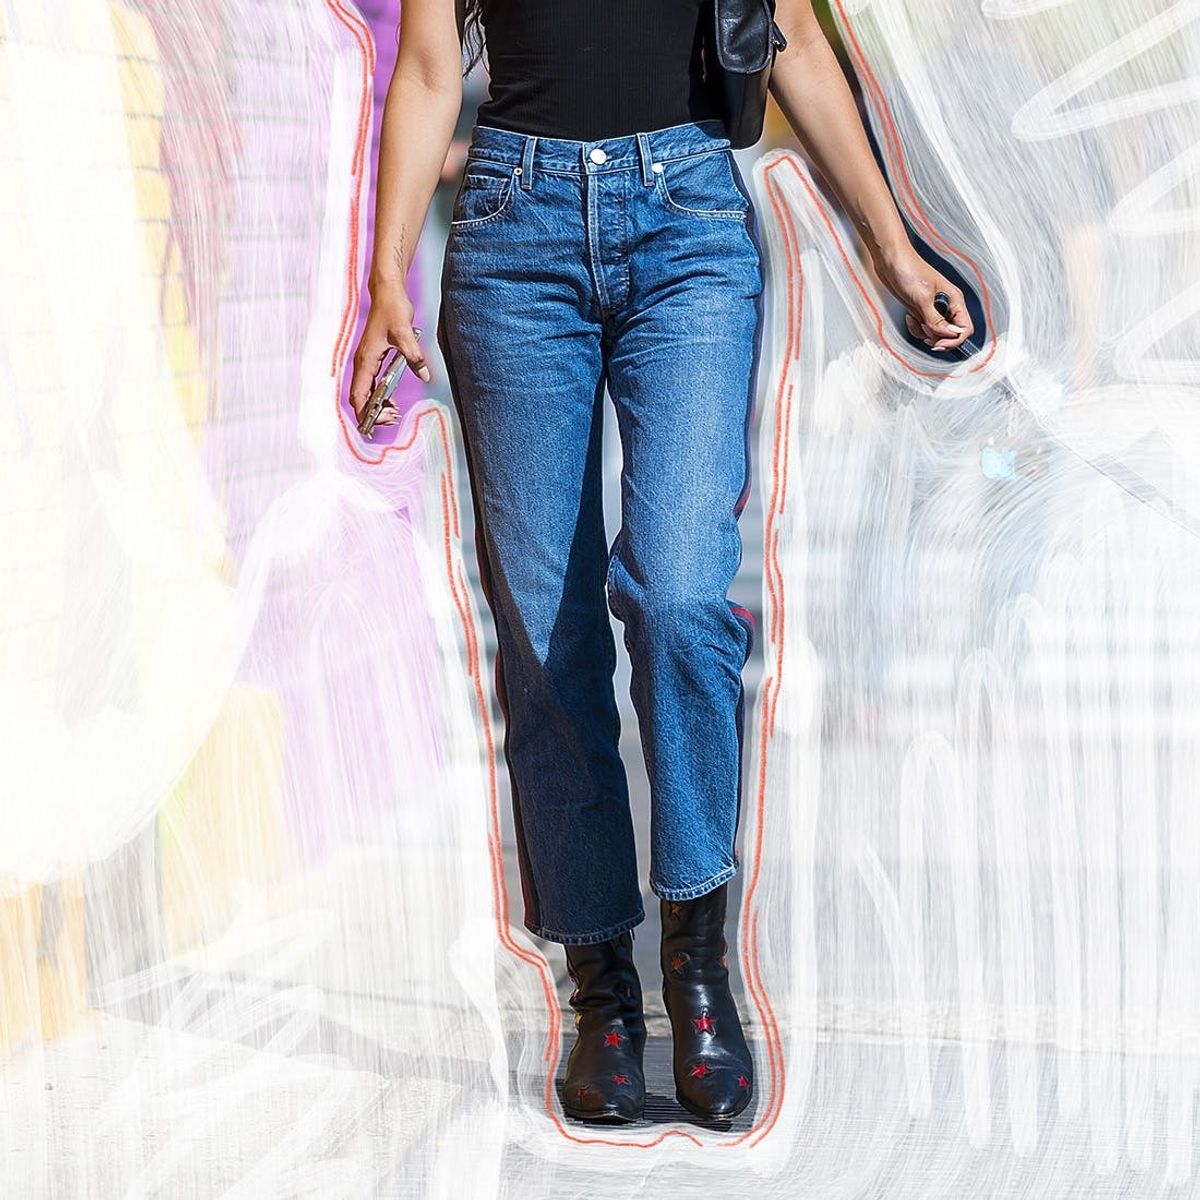 9 Reasons We’re (Still) Obsessed With the Mom Jean